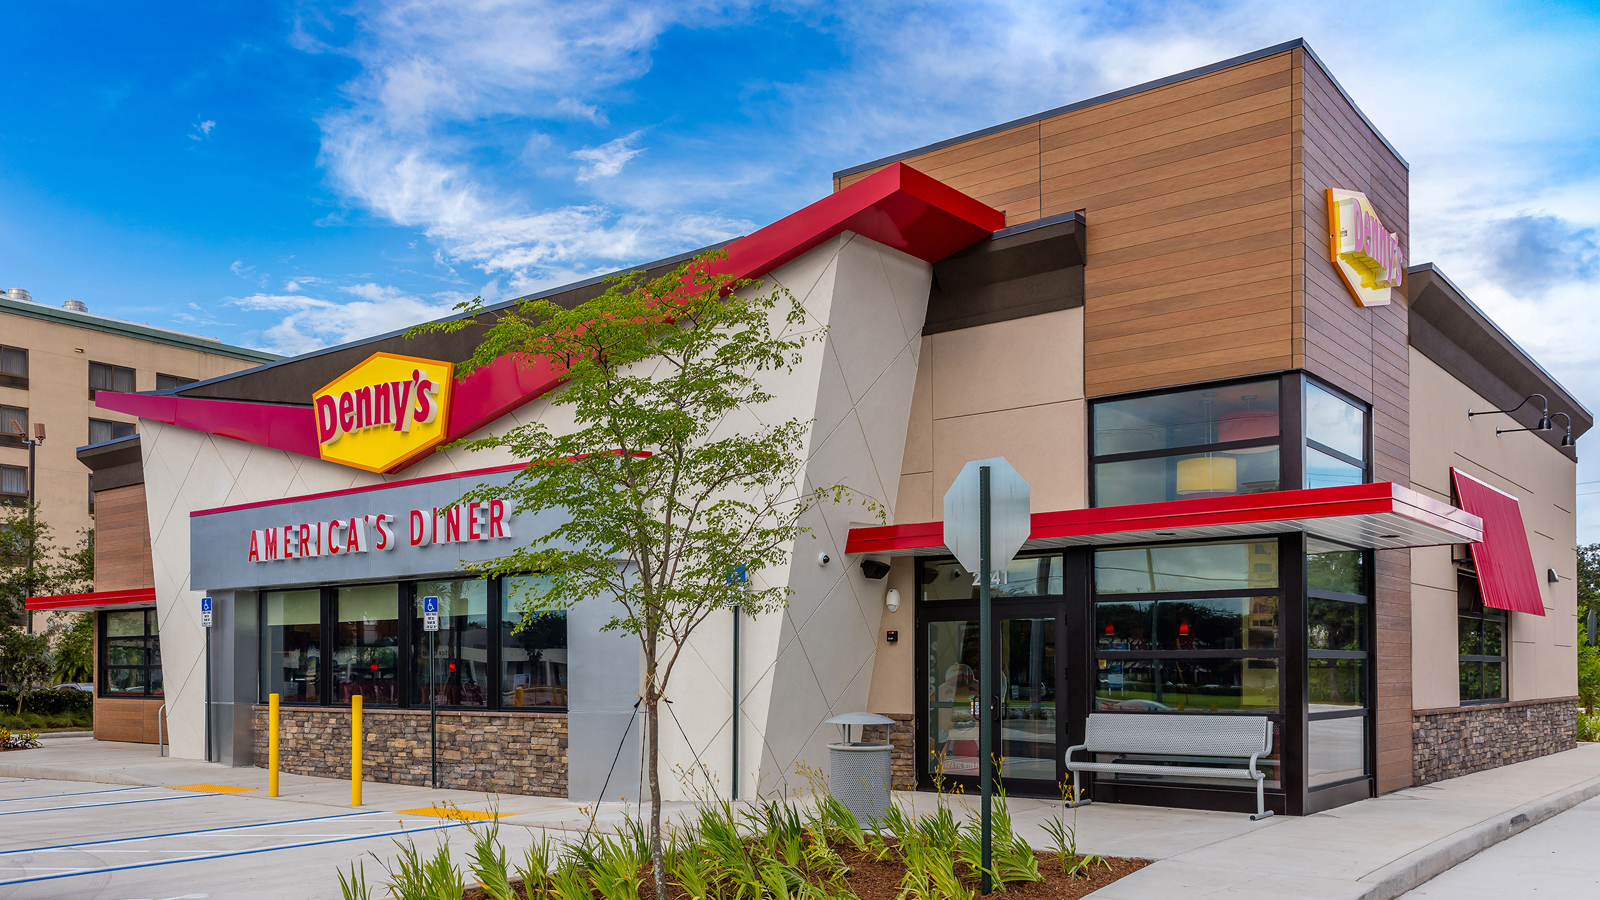 Denny's saves $1.2M annually with a finance and HR system from Workday.